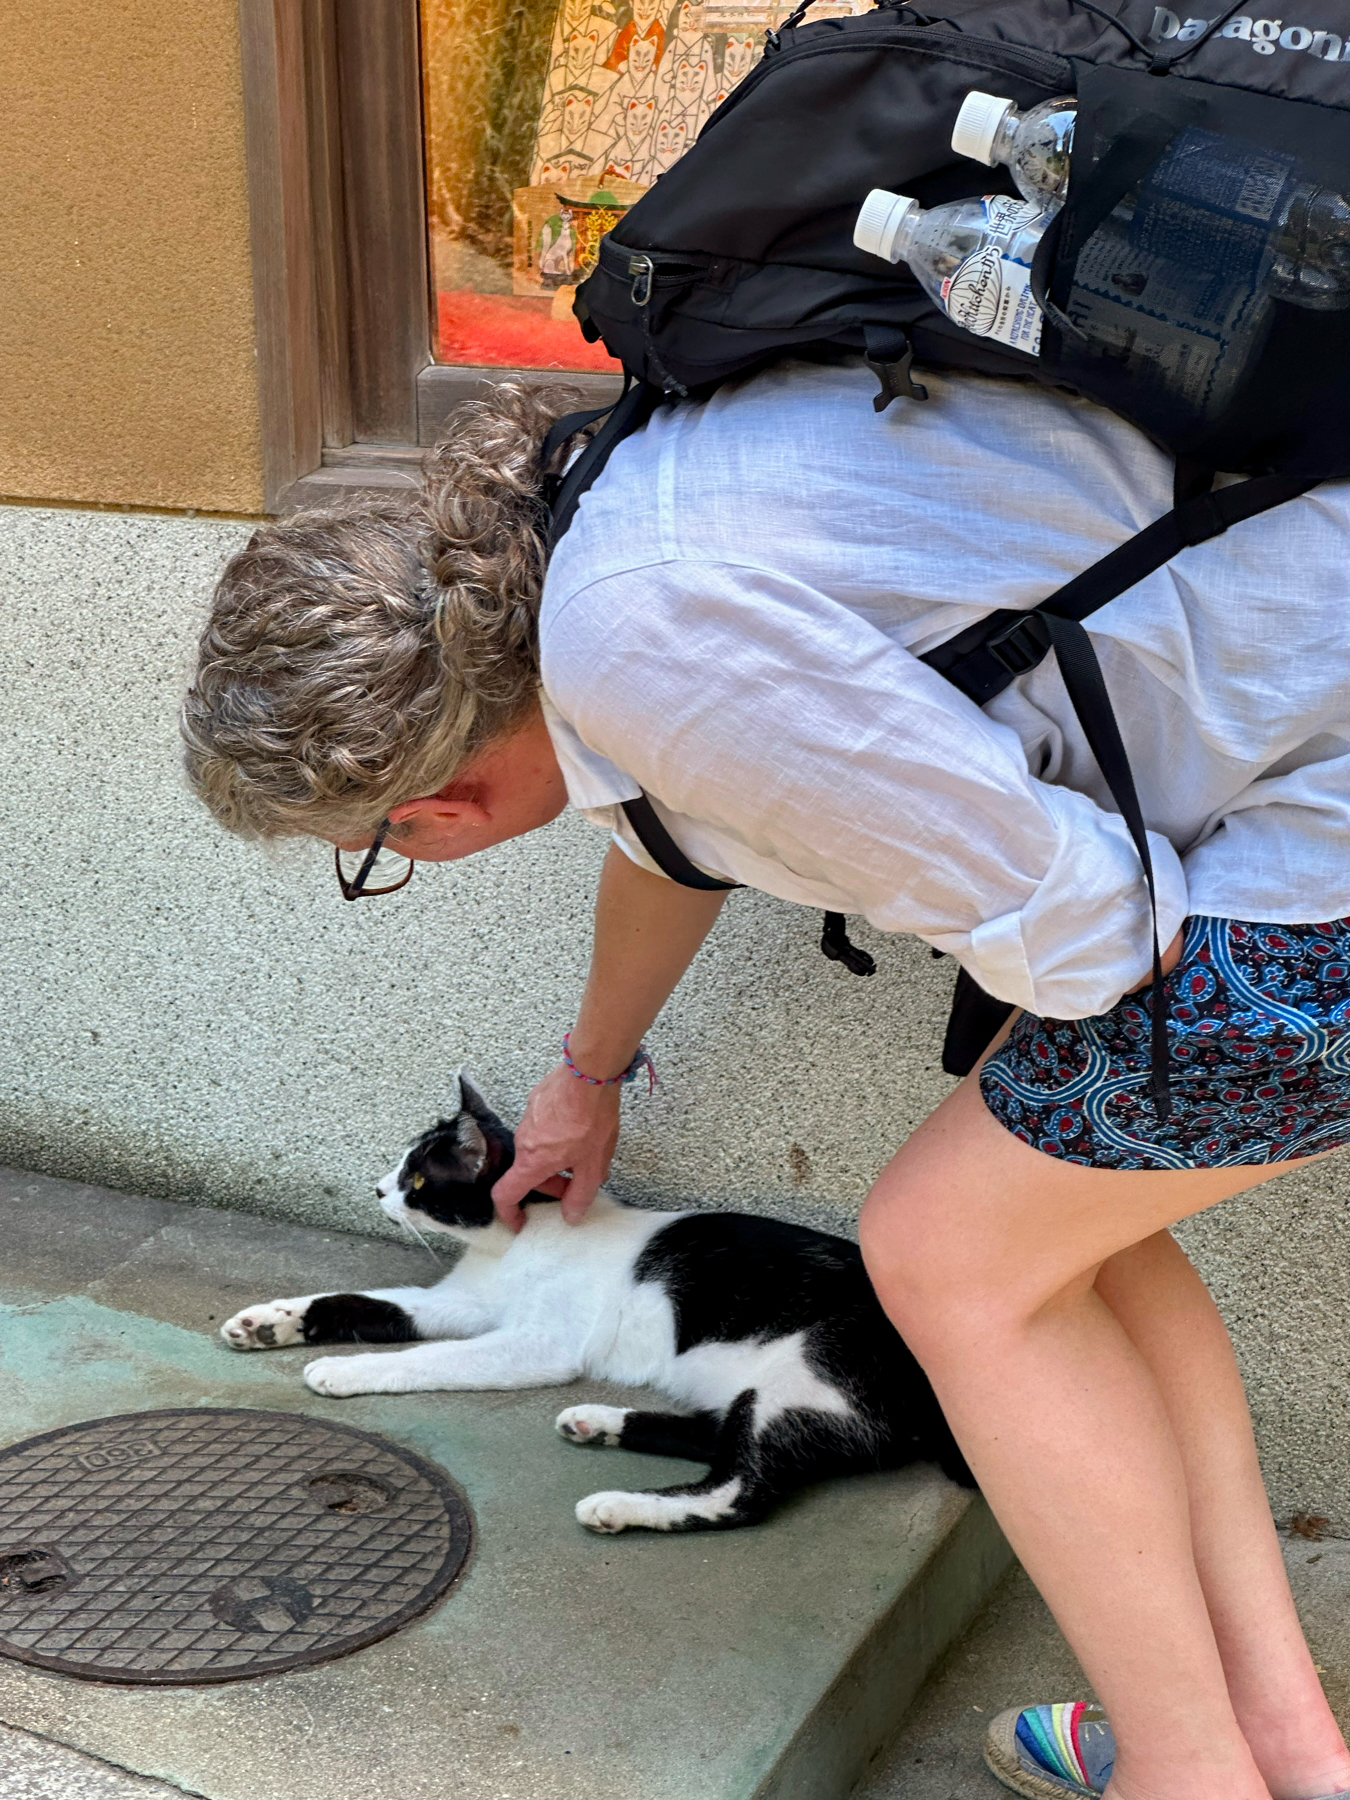 My wife crouched down petting a black and white cat lying on a doorstep, with a backpack and water bottles visible.